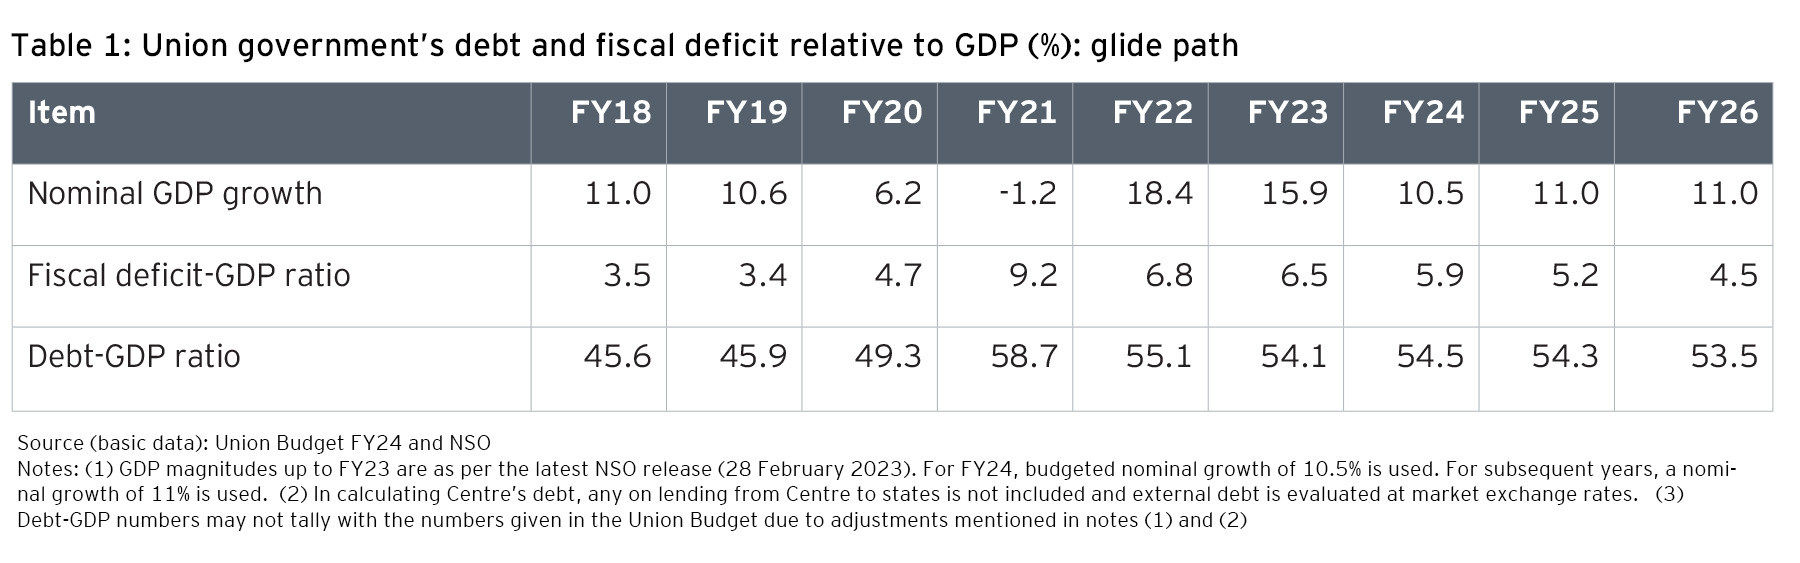 Union government’s debt and fiscal deficit relative to GDP (%): glide path